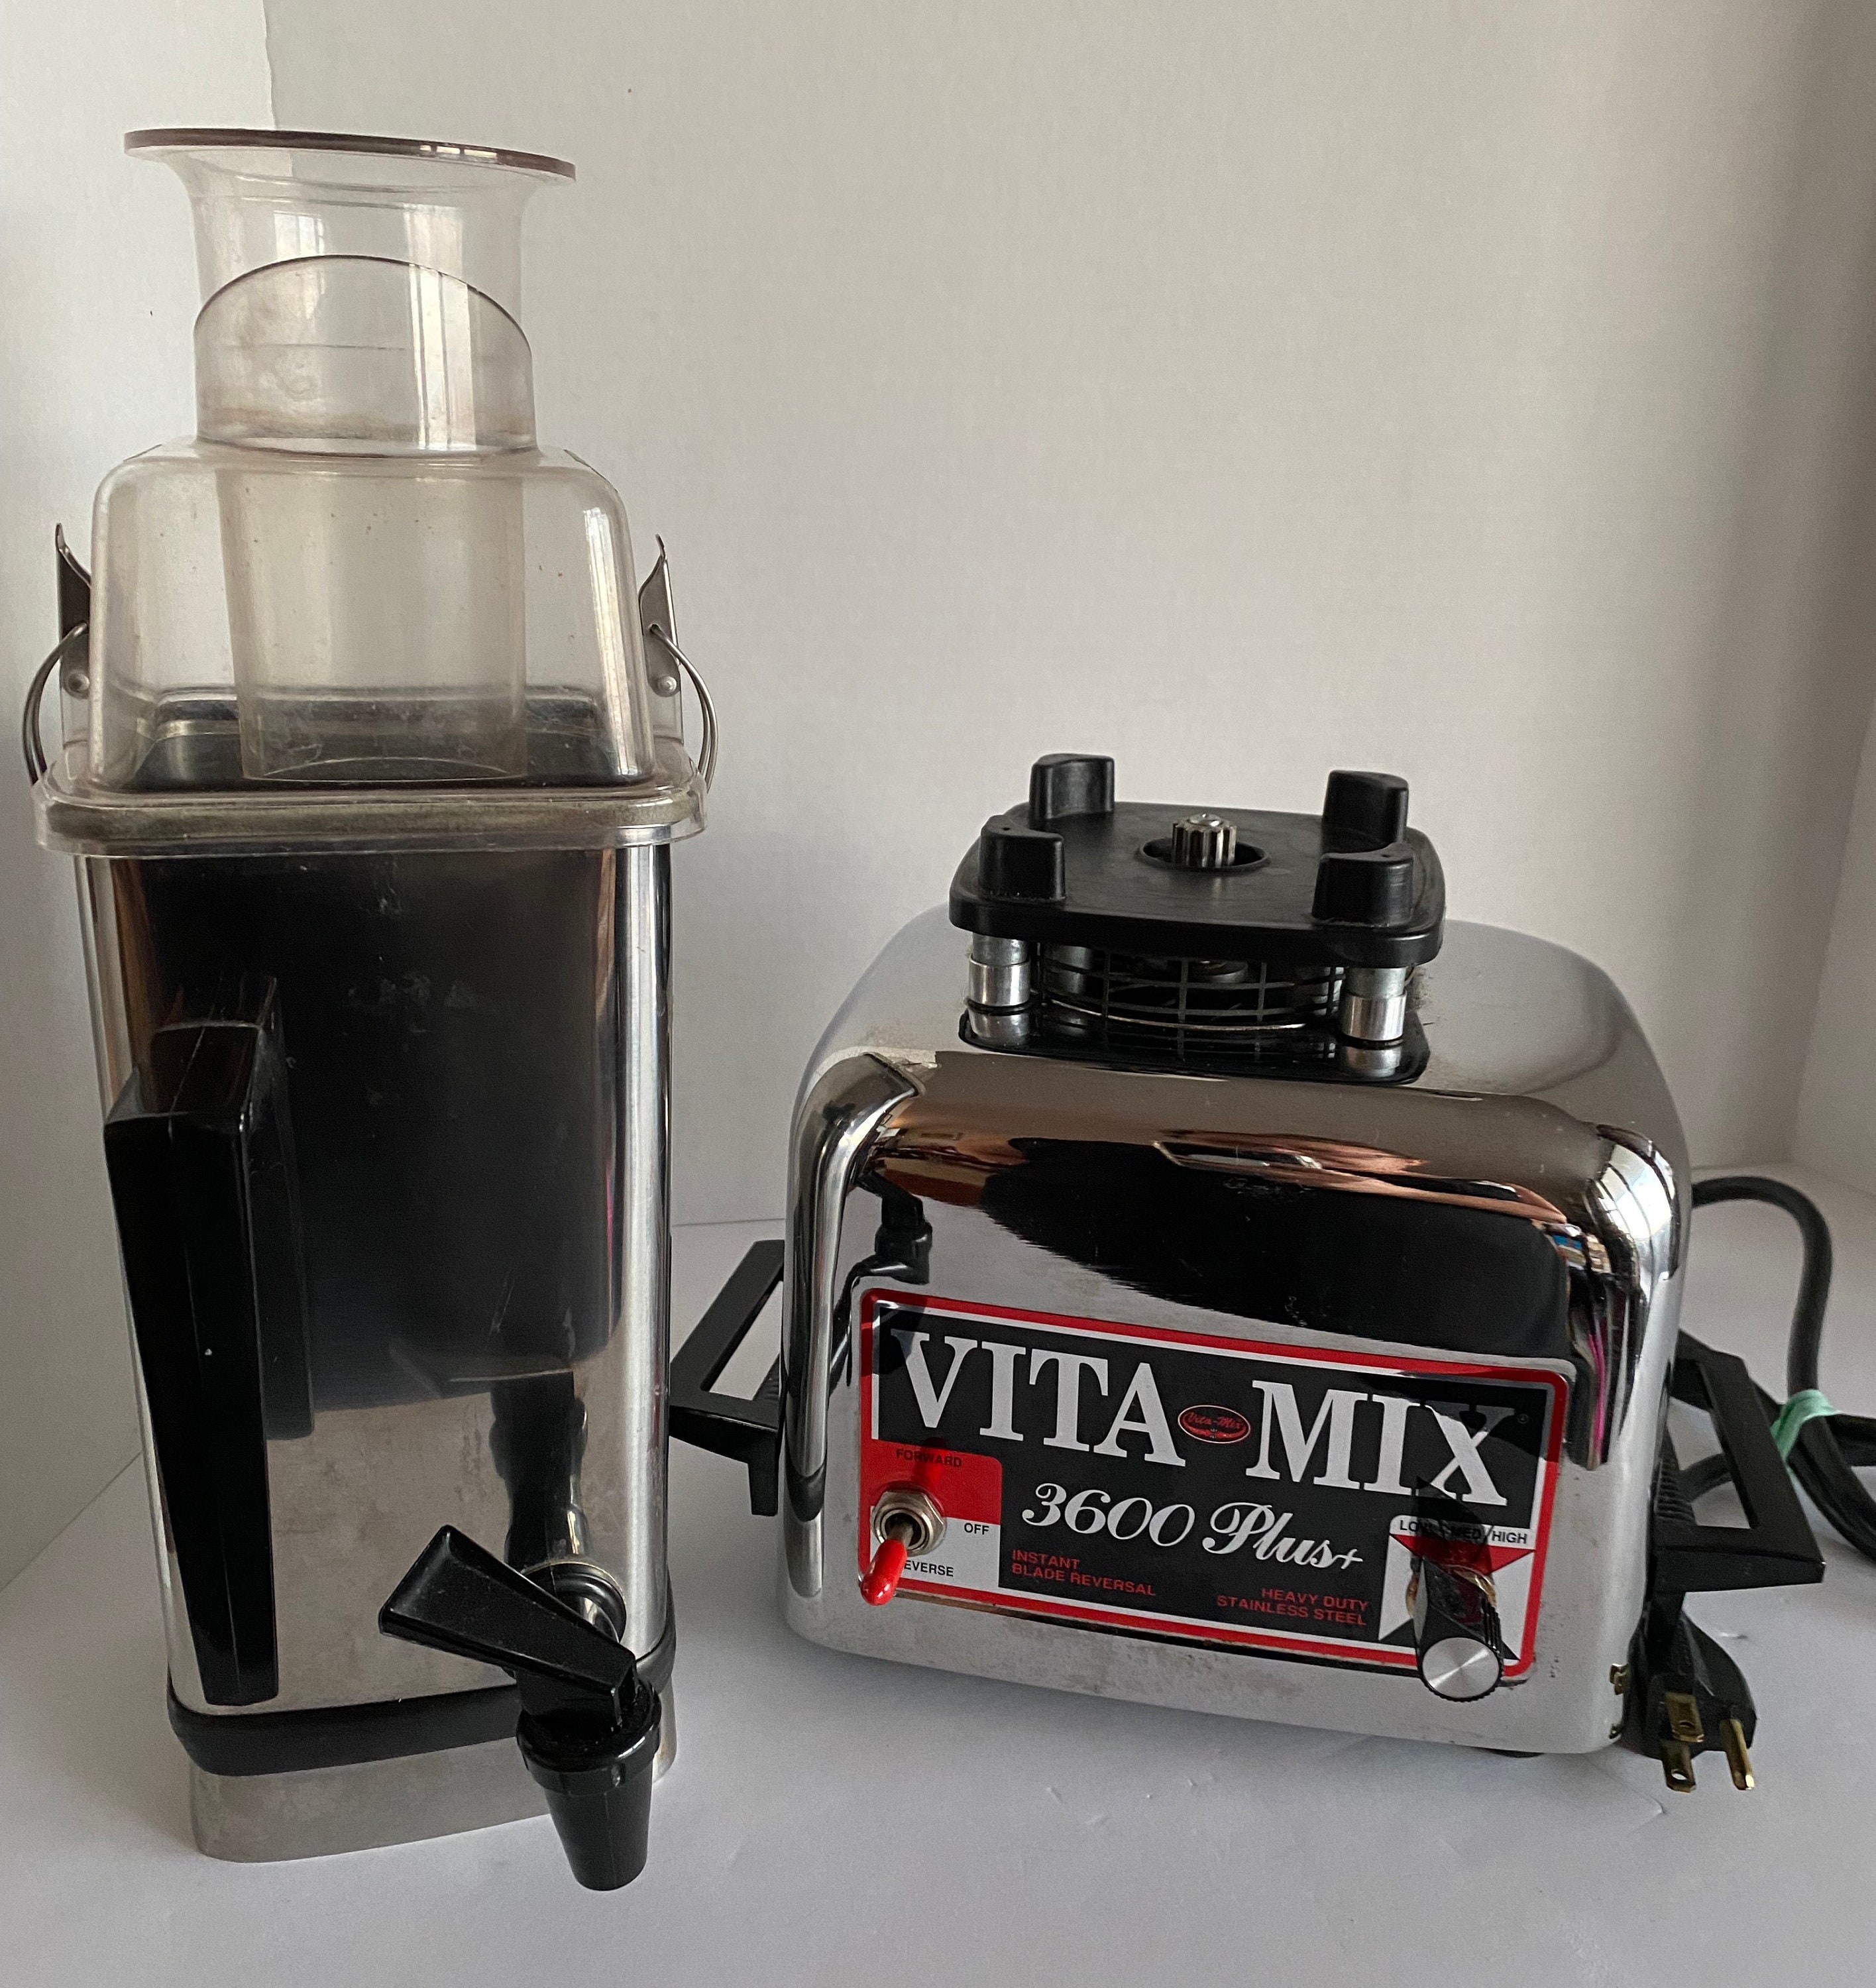 Vitamix 3600 Plus Blender Mixer Stainless w/Steel Container Action Dome